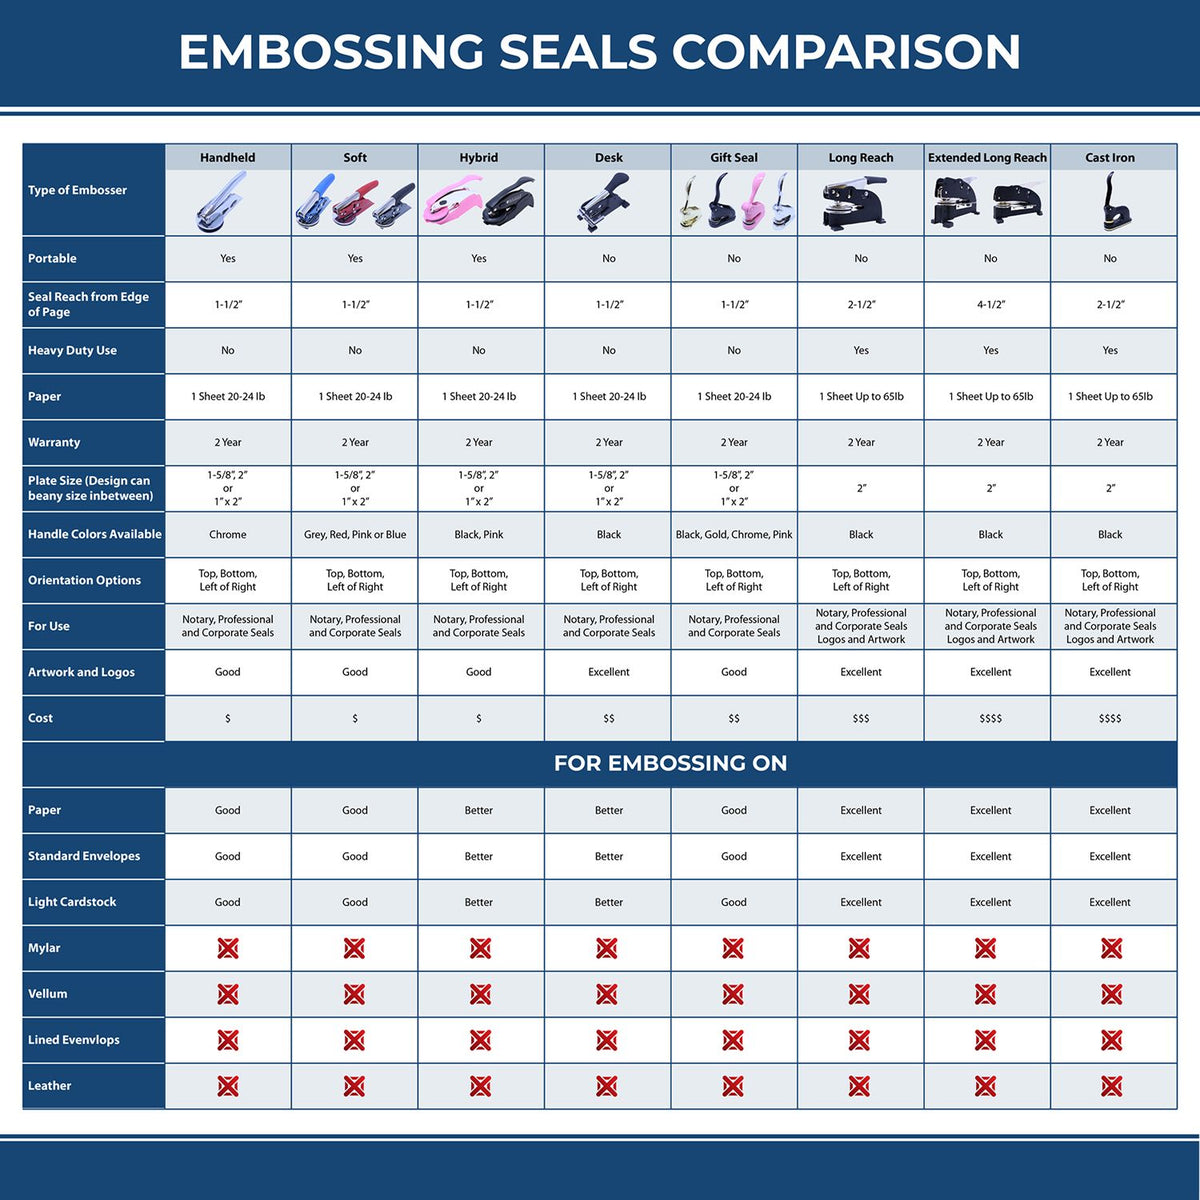 A comparison chart for the different types of mount models available for the State of New Jersey Soft Land Surveyor Embossing Seal.